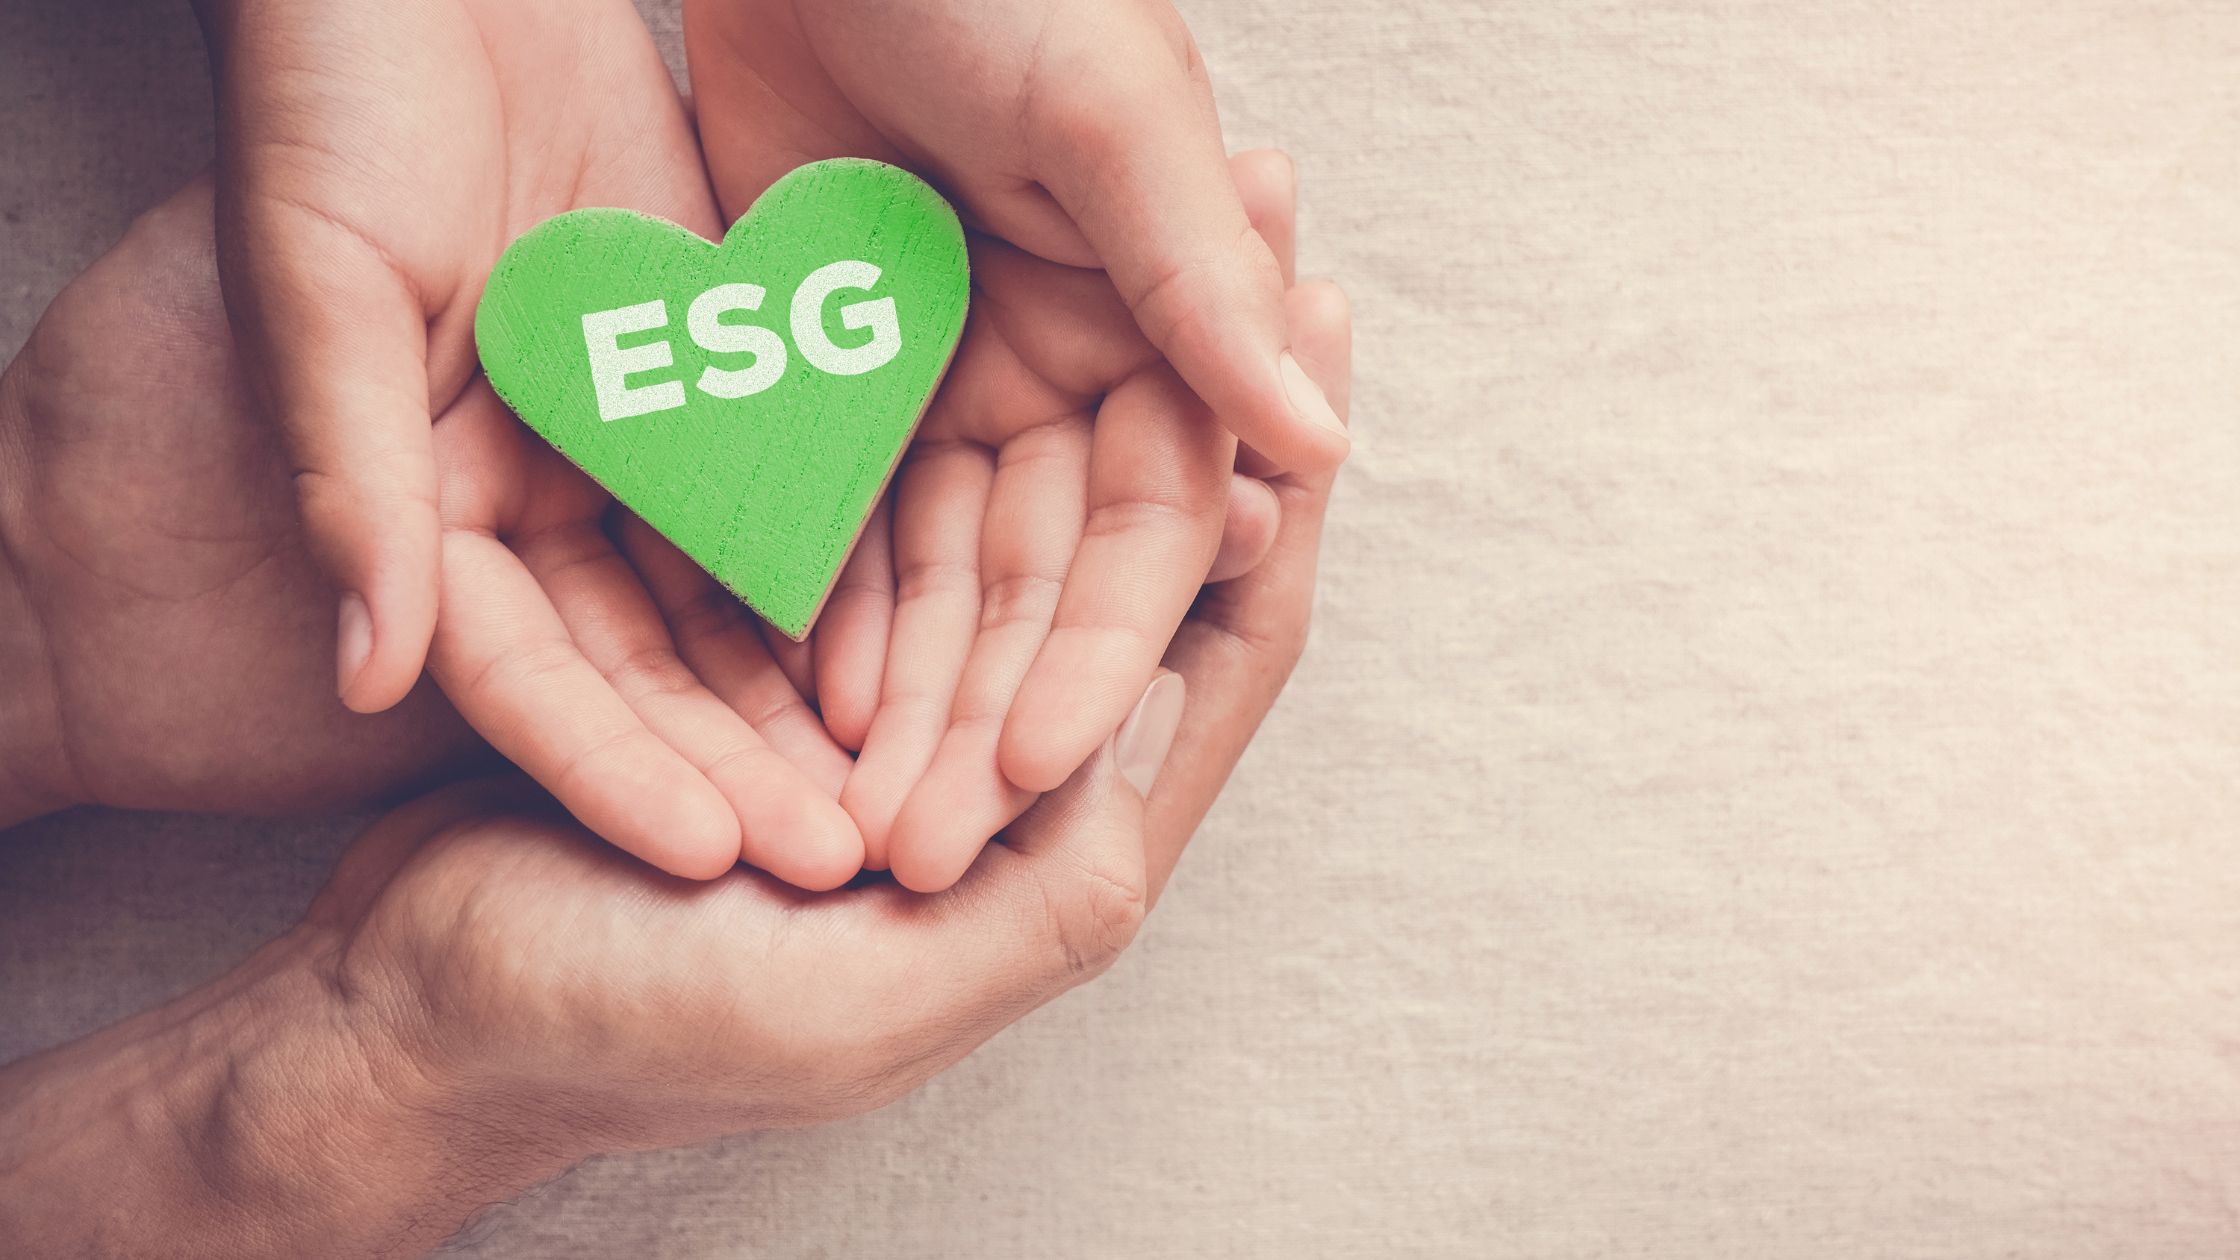 101 of ESG rankings. Accessibility accounts for more than you think.